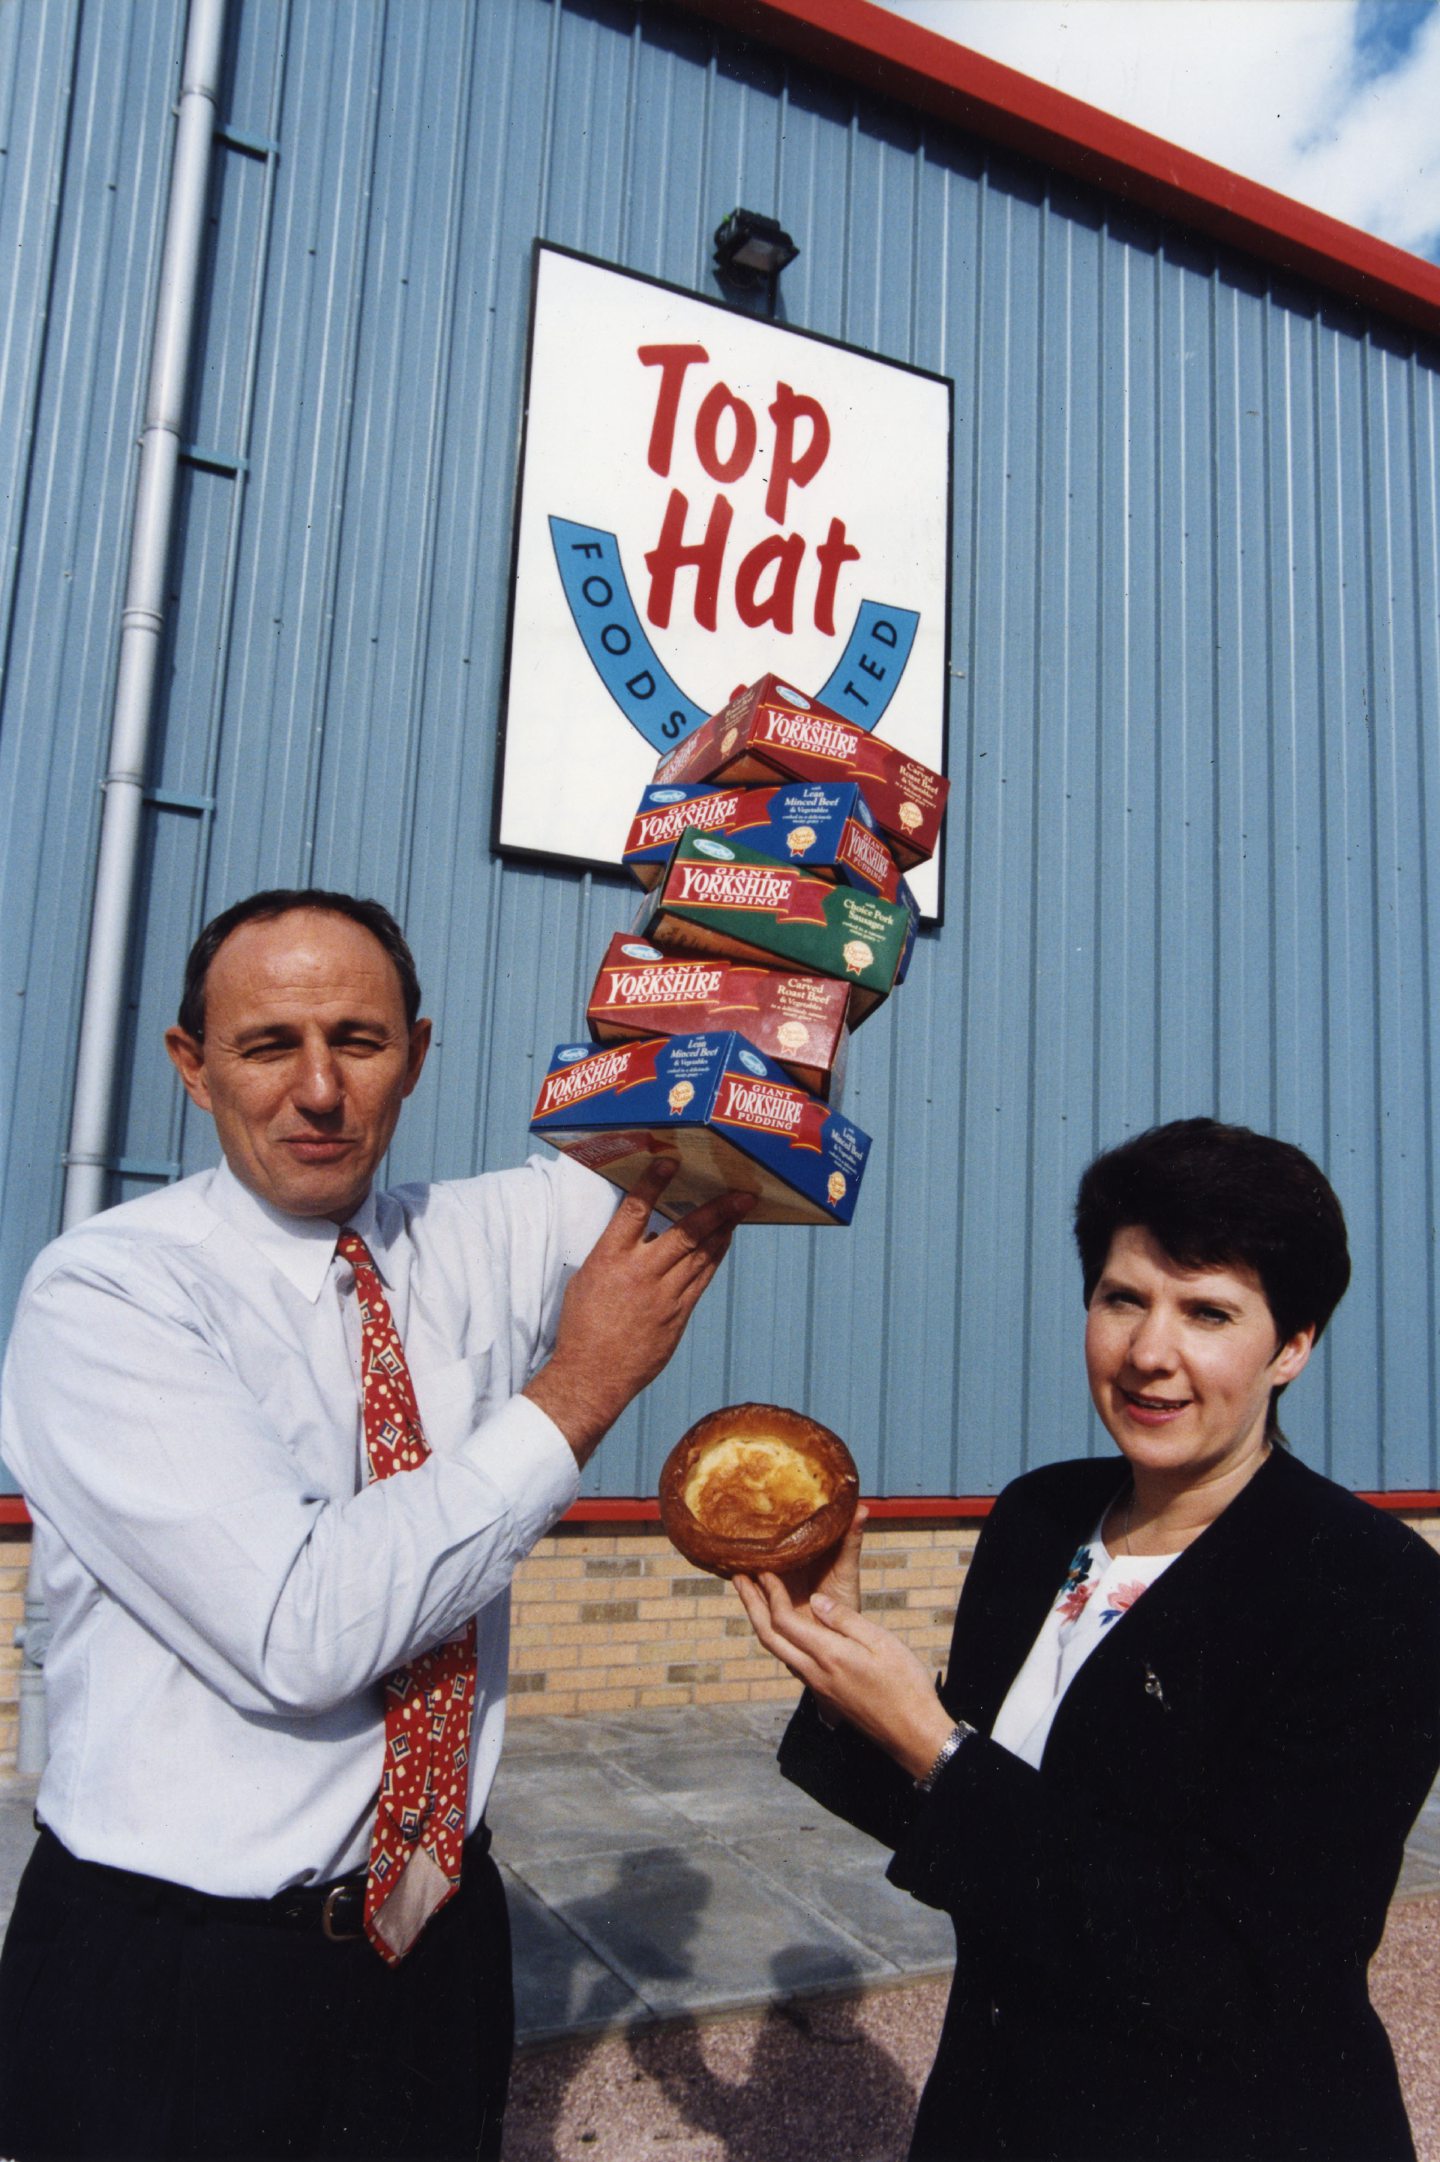 Top Hat Foods Ltd director John Whitehead was celebrating in 1995 with Tesco's Scottish marketing manager Isa Kinnear.